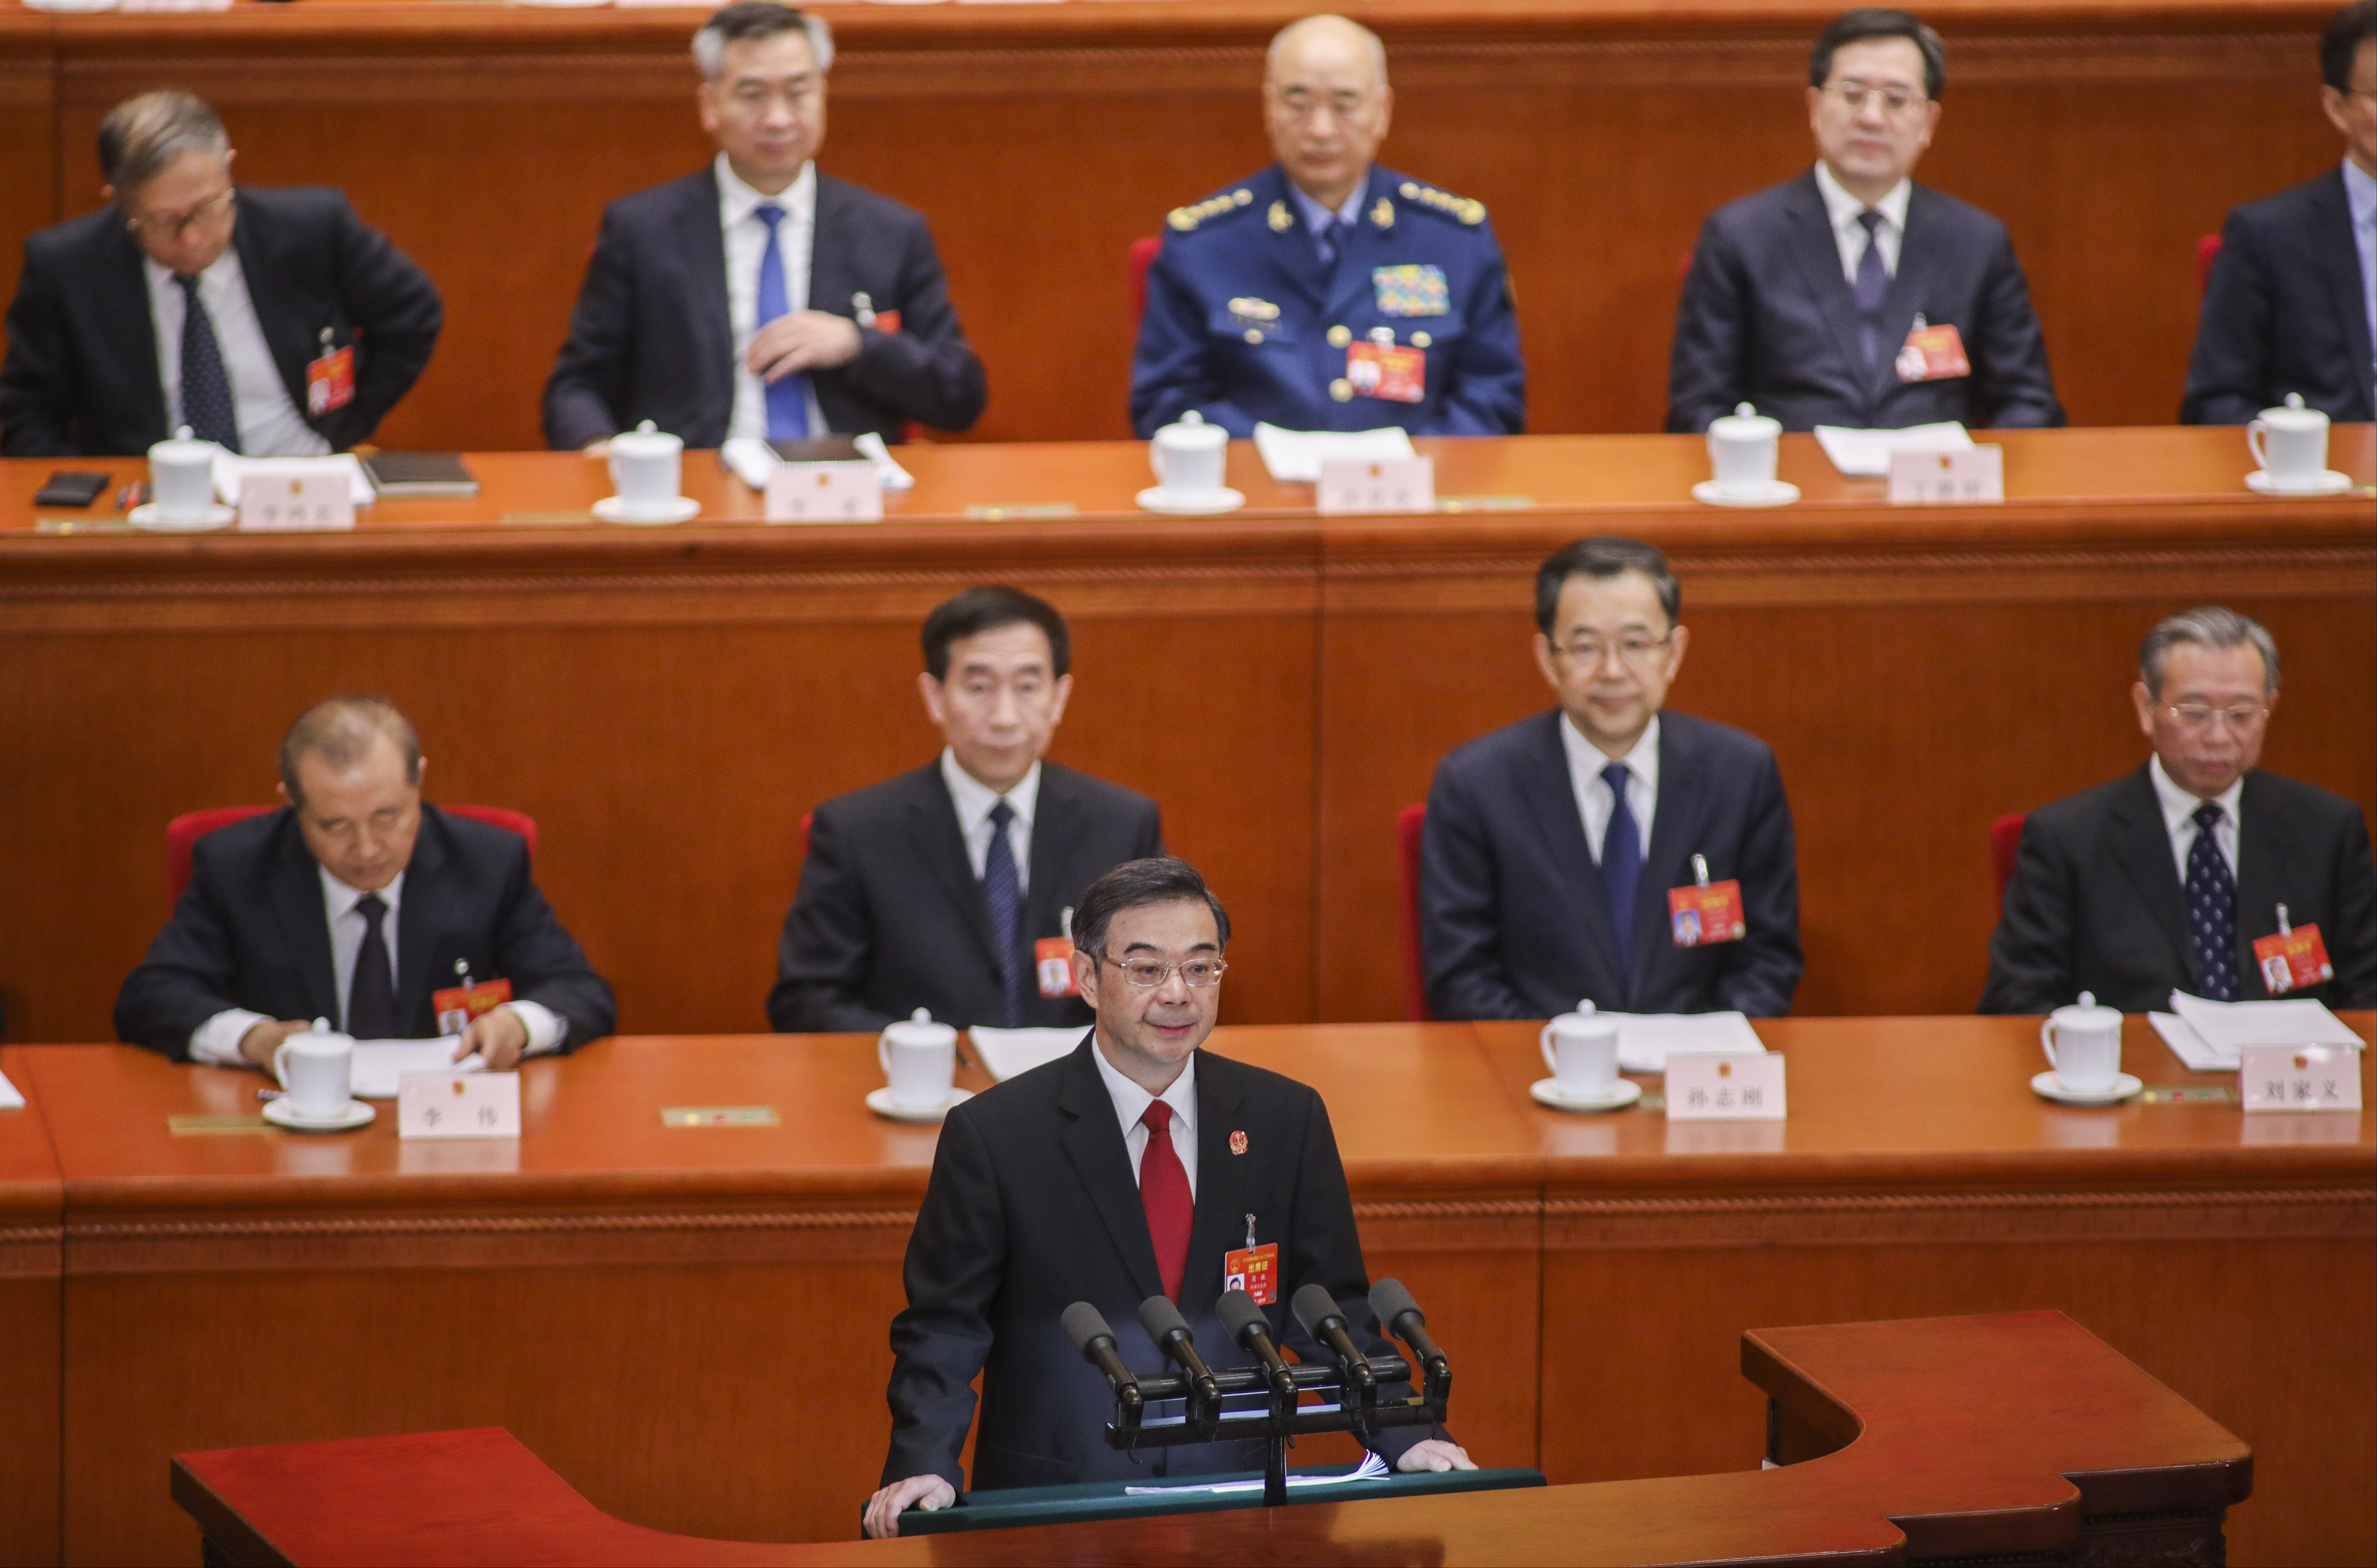 Zhou Qiang, chief justice and president of the Supreme People’s Court of China, presents his work report to the 13th National People’s Congress at the Great Hall of the People in Beijing on March 12, 2019. Photo: Simon Song